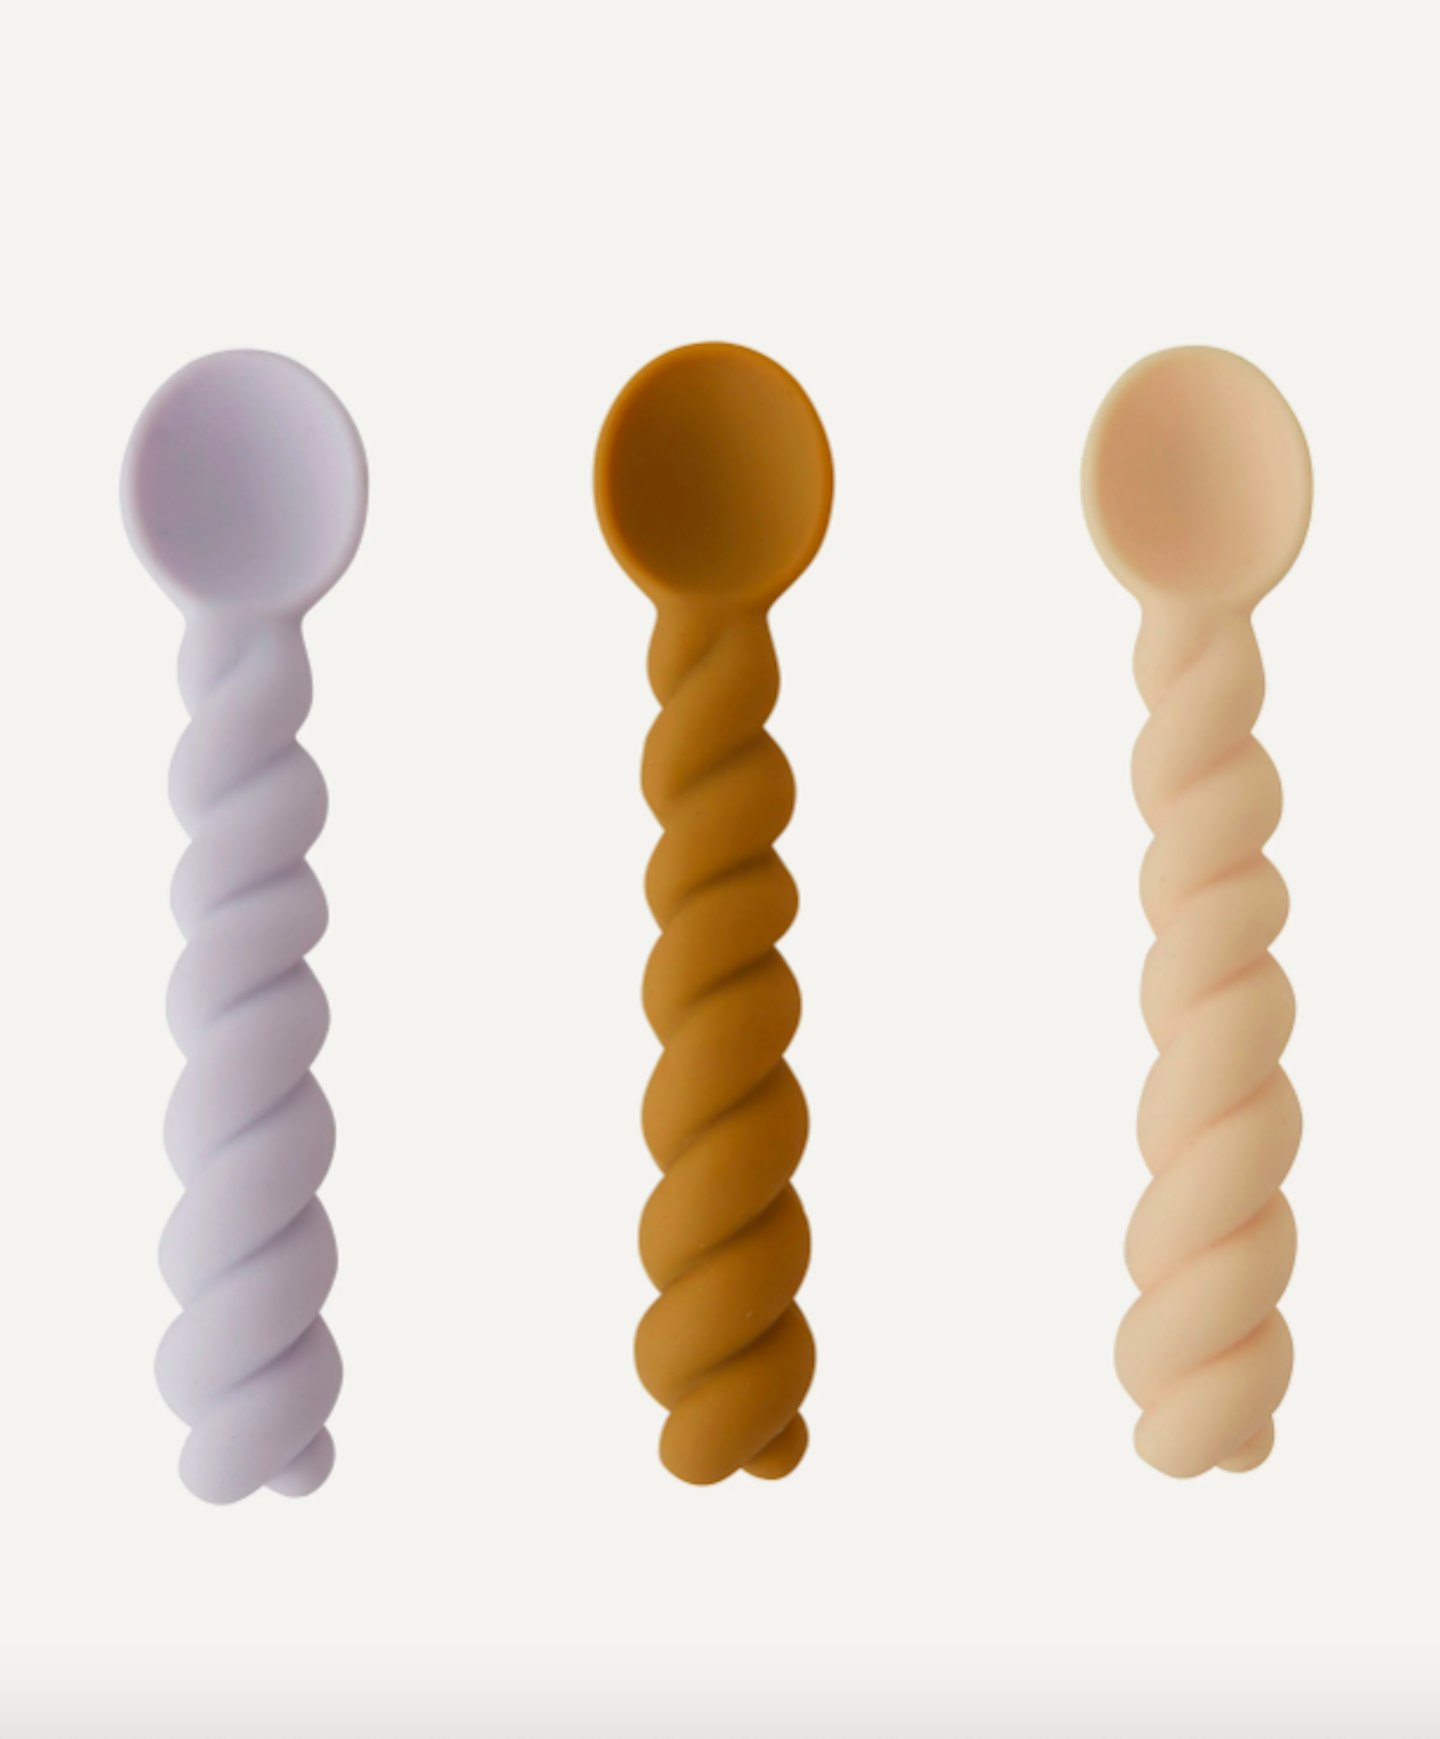 Oyoy Living Design, Mellow Spoon Pack Of 3, £14.50